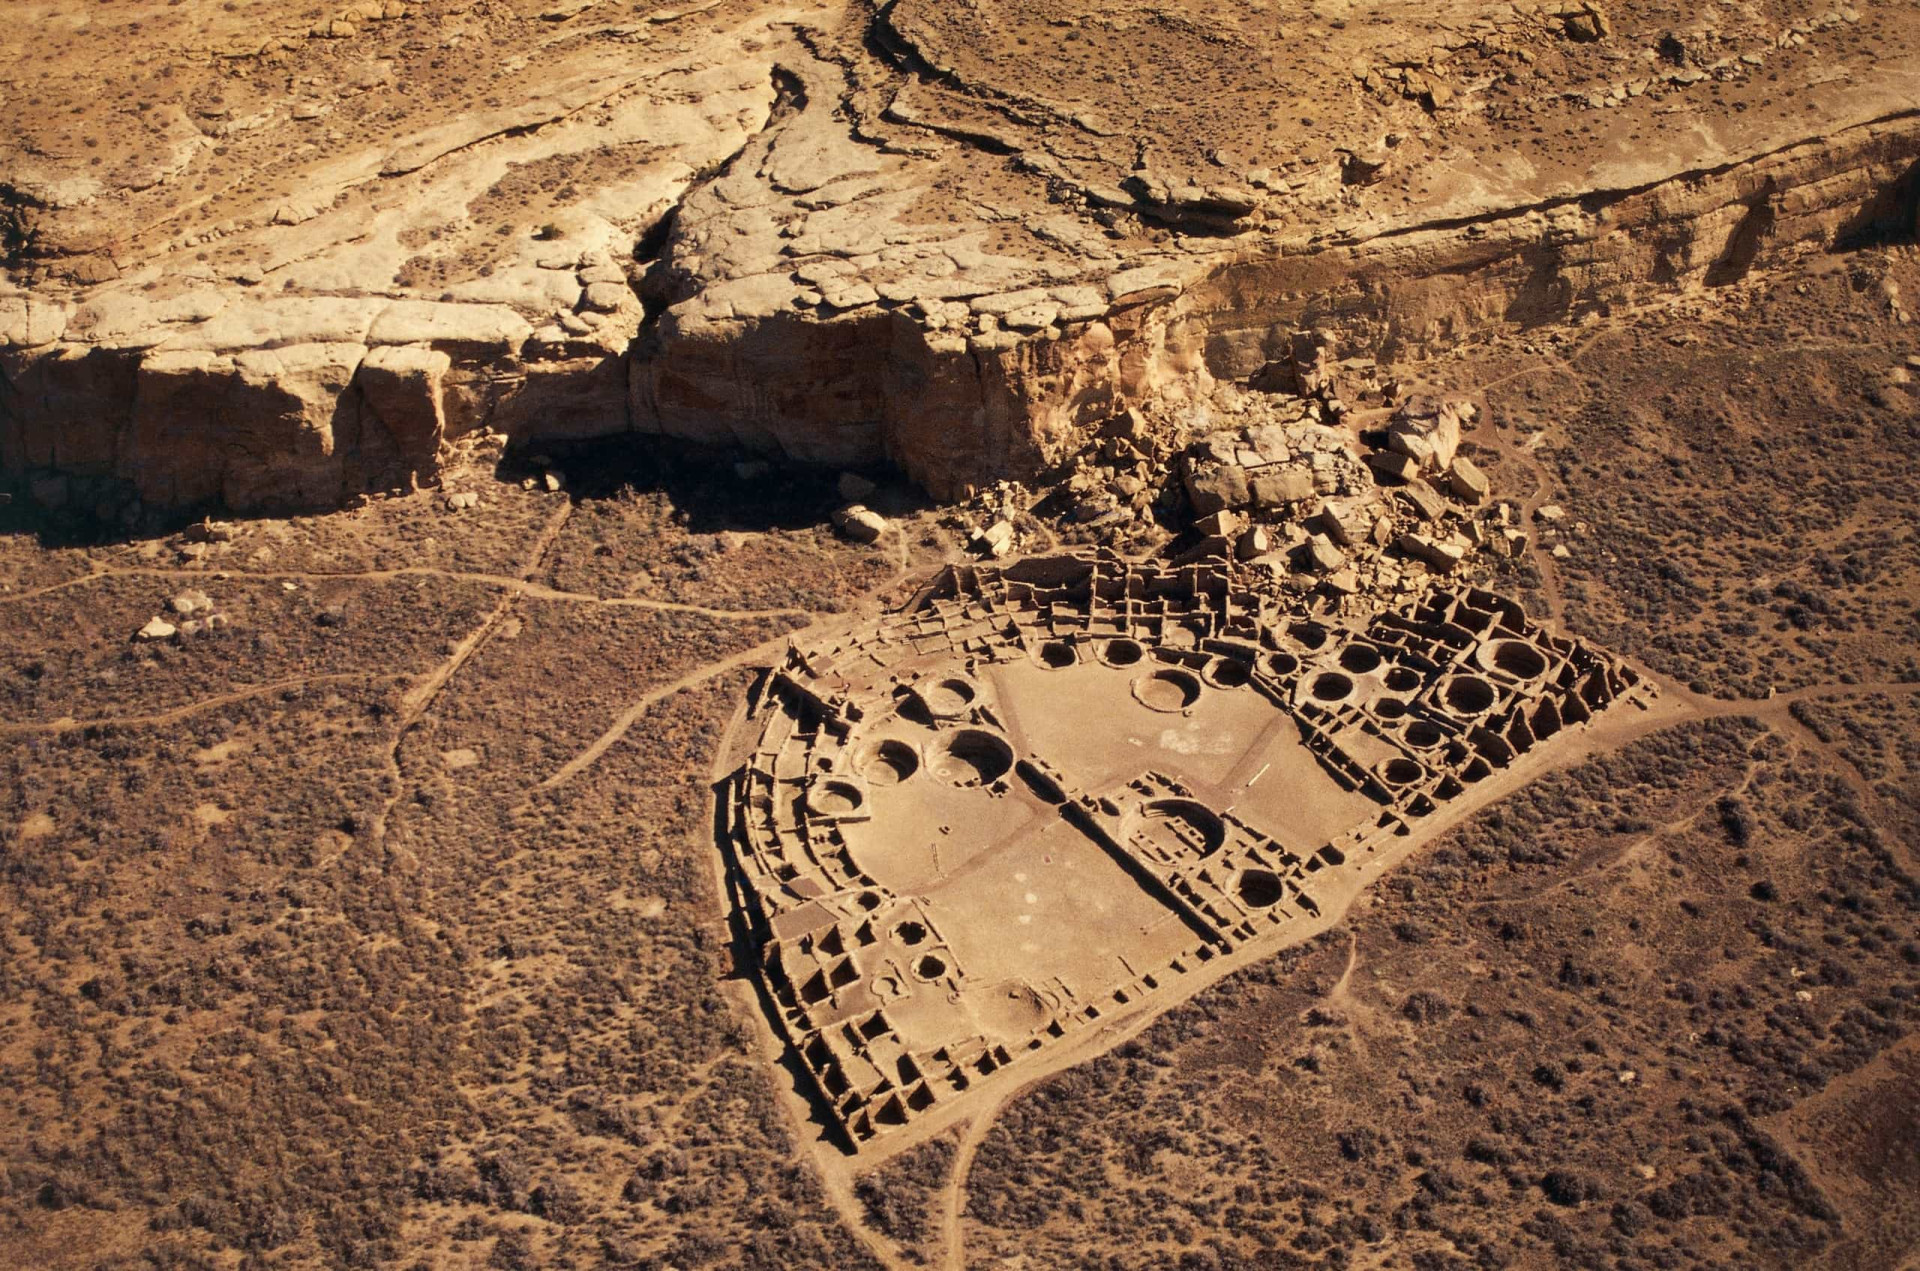 <p>If you only have time to tick off one archaeological site in New Mexico, make sure it's the Chaco Culture National Historical Park. This centuries-old settlement is one of the most important pre-Columbian cultural and historical areas in the United States, and deserving of its World Heritage status.</p>